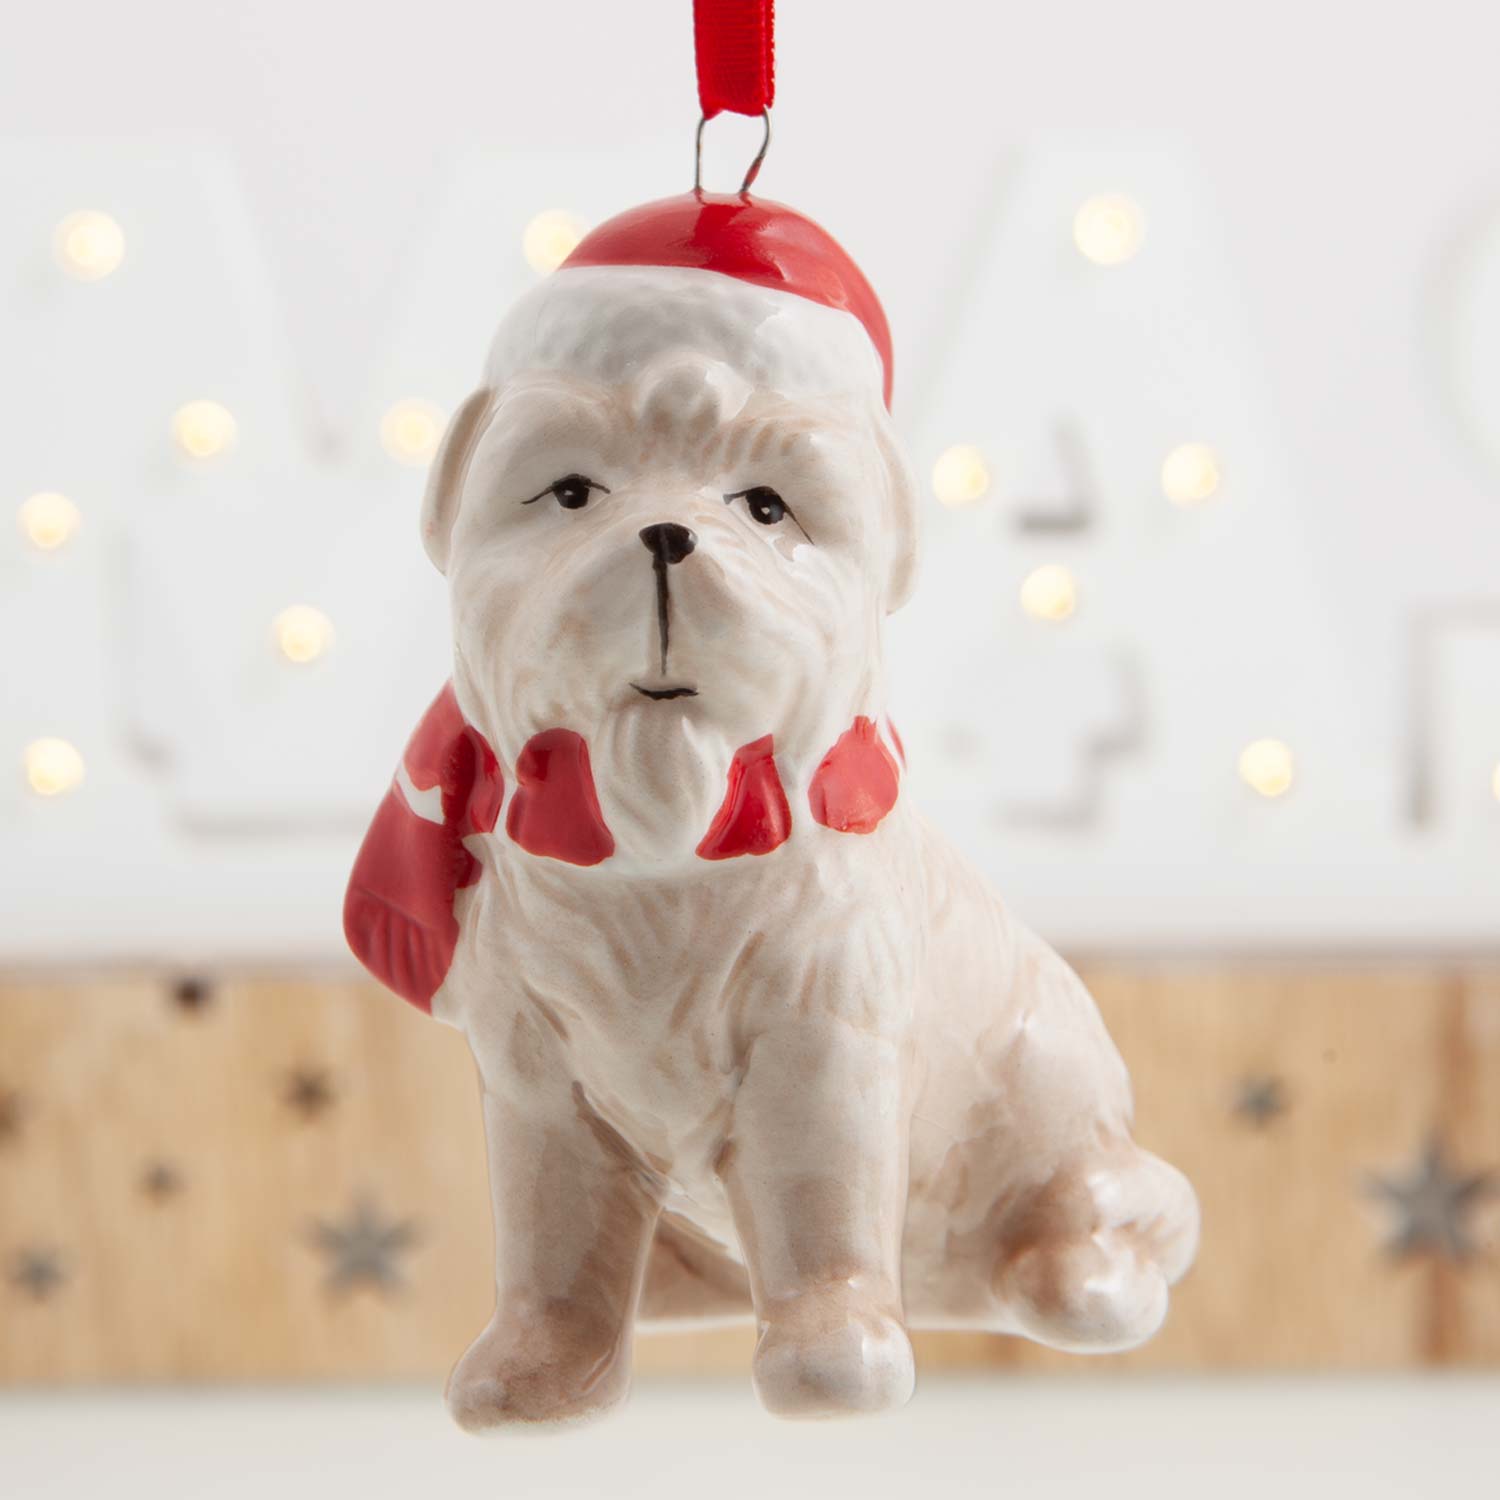 Dog Krazy Gifts -  Ceramic Hanging Dog Decoration available from the Christmas Grotto at DogKrazyGifts.co.uk